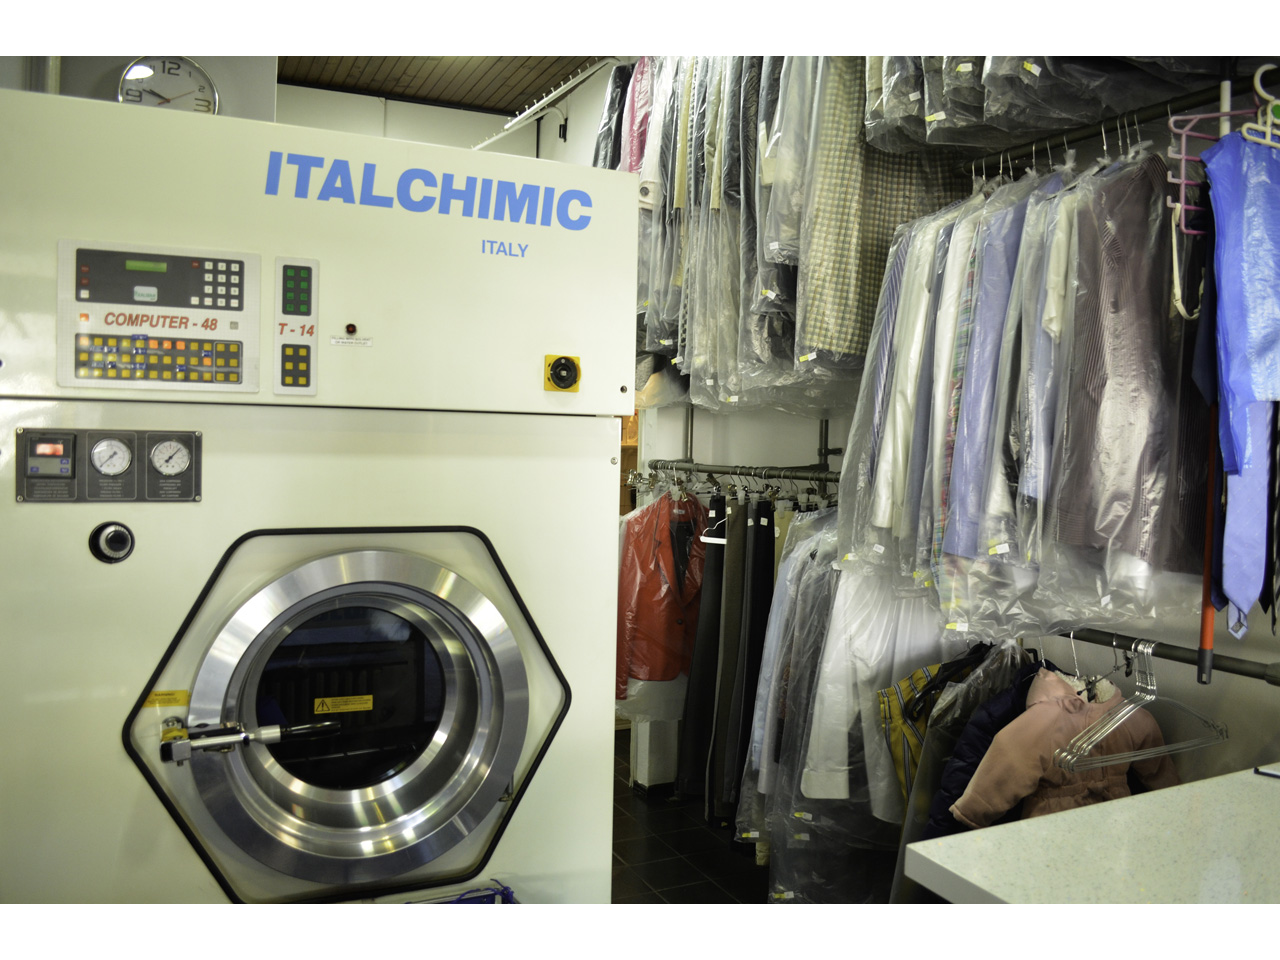 SAIS DRY CLEANING AND LAUNDRY WASH Laundries Beograd